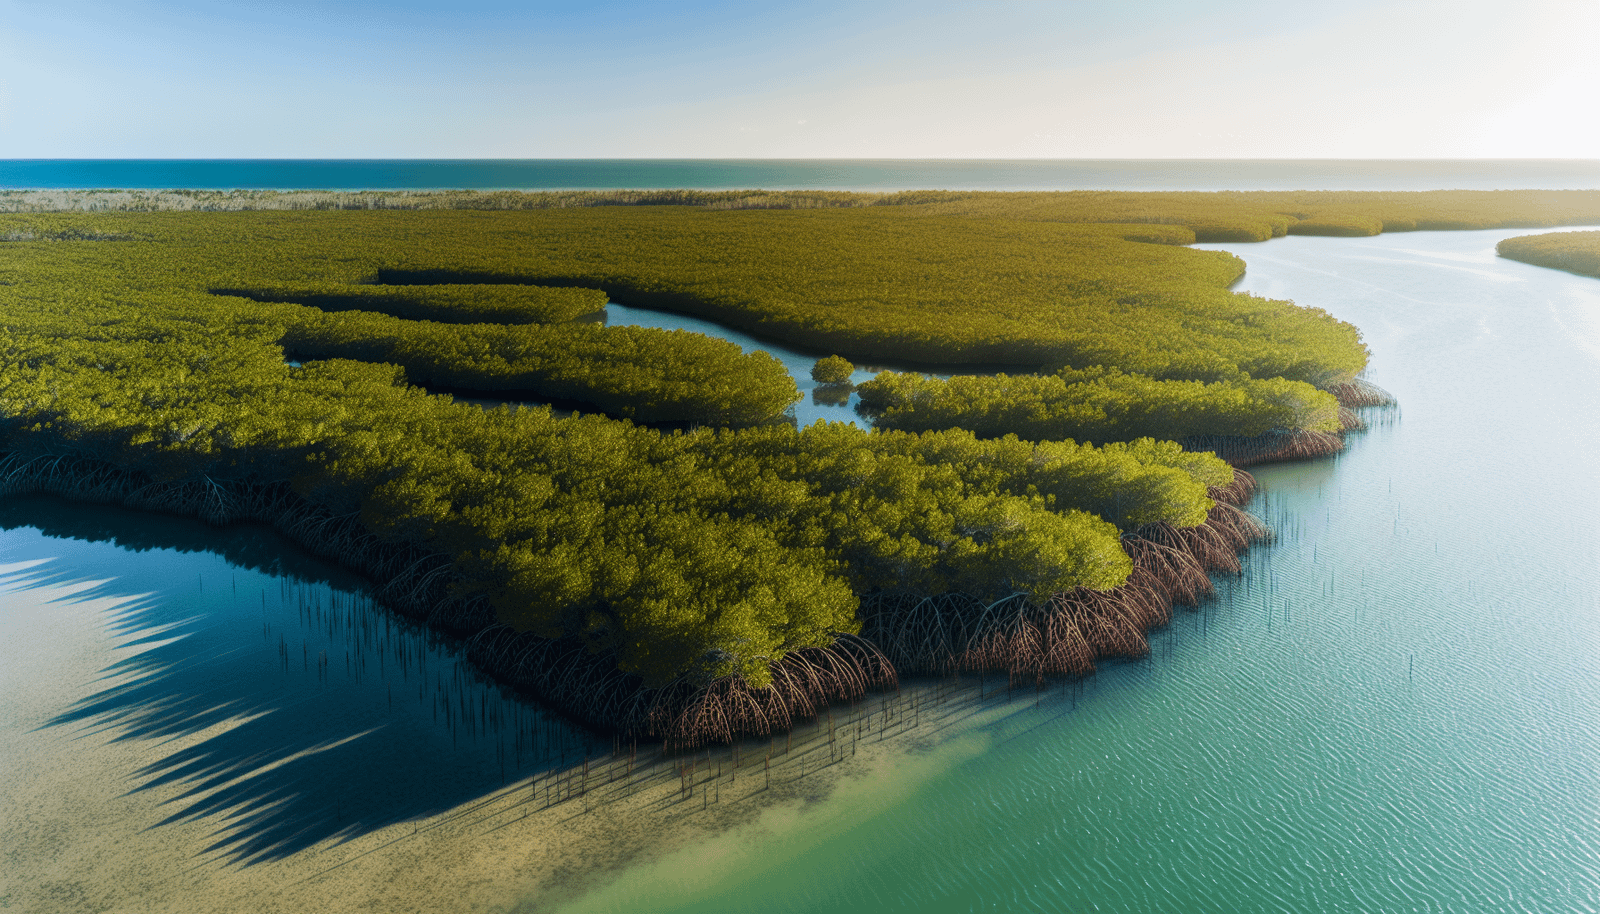 Aerial view of mangrove forests in the Florida Keys